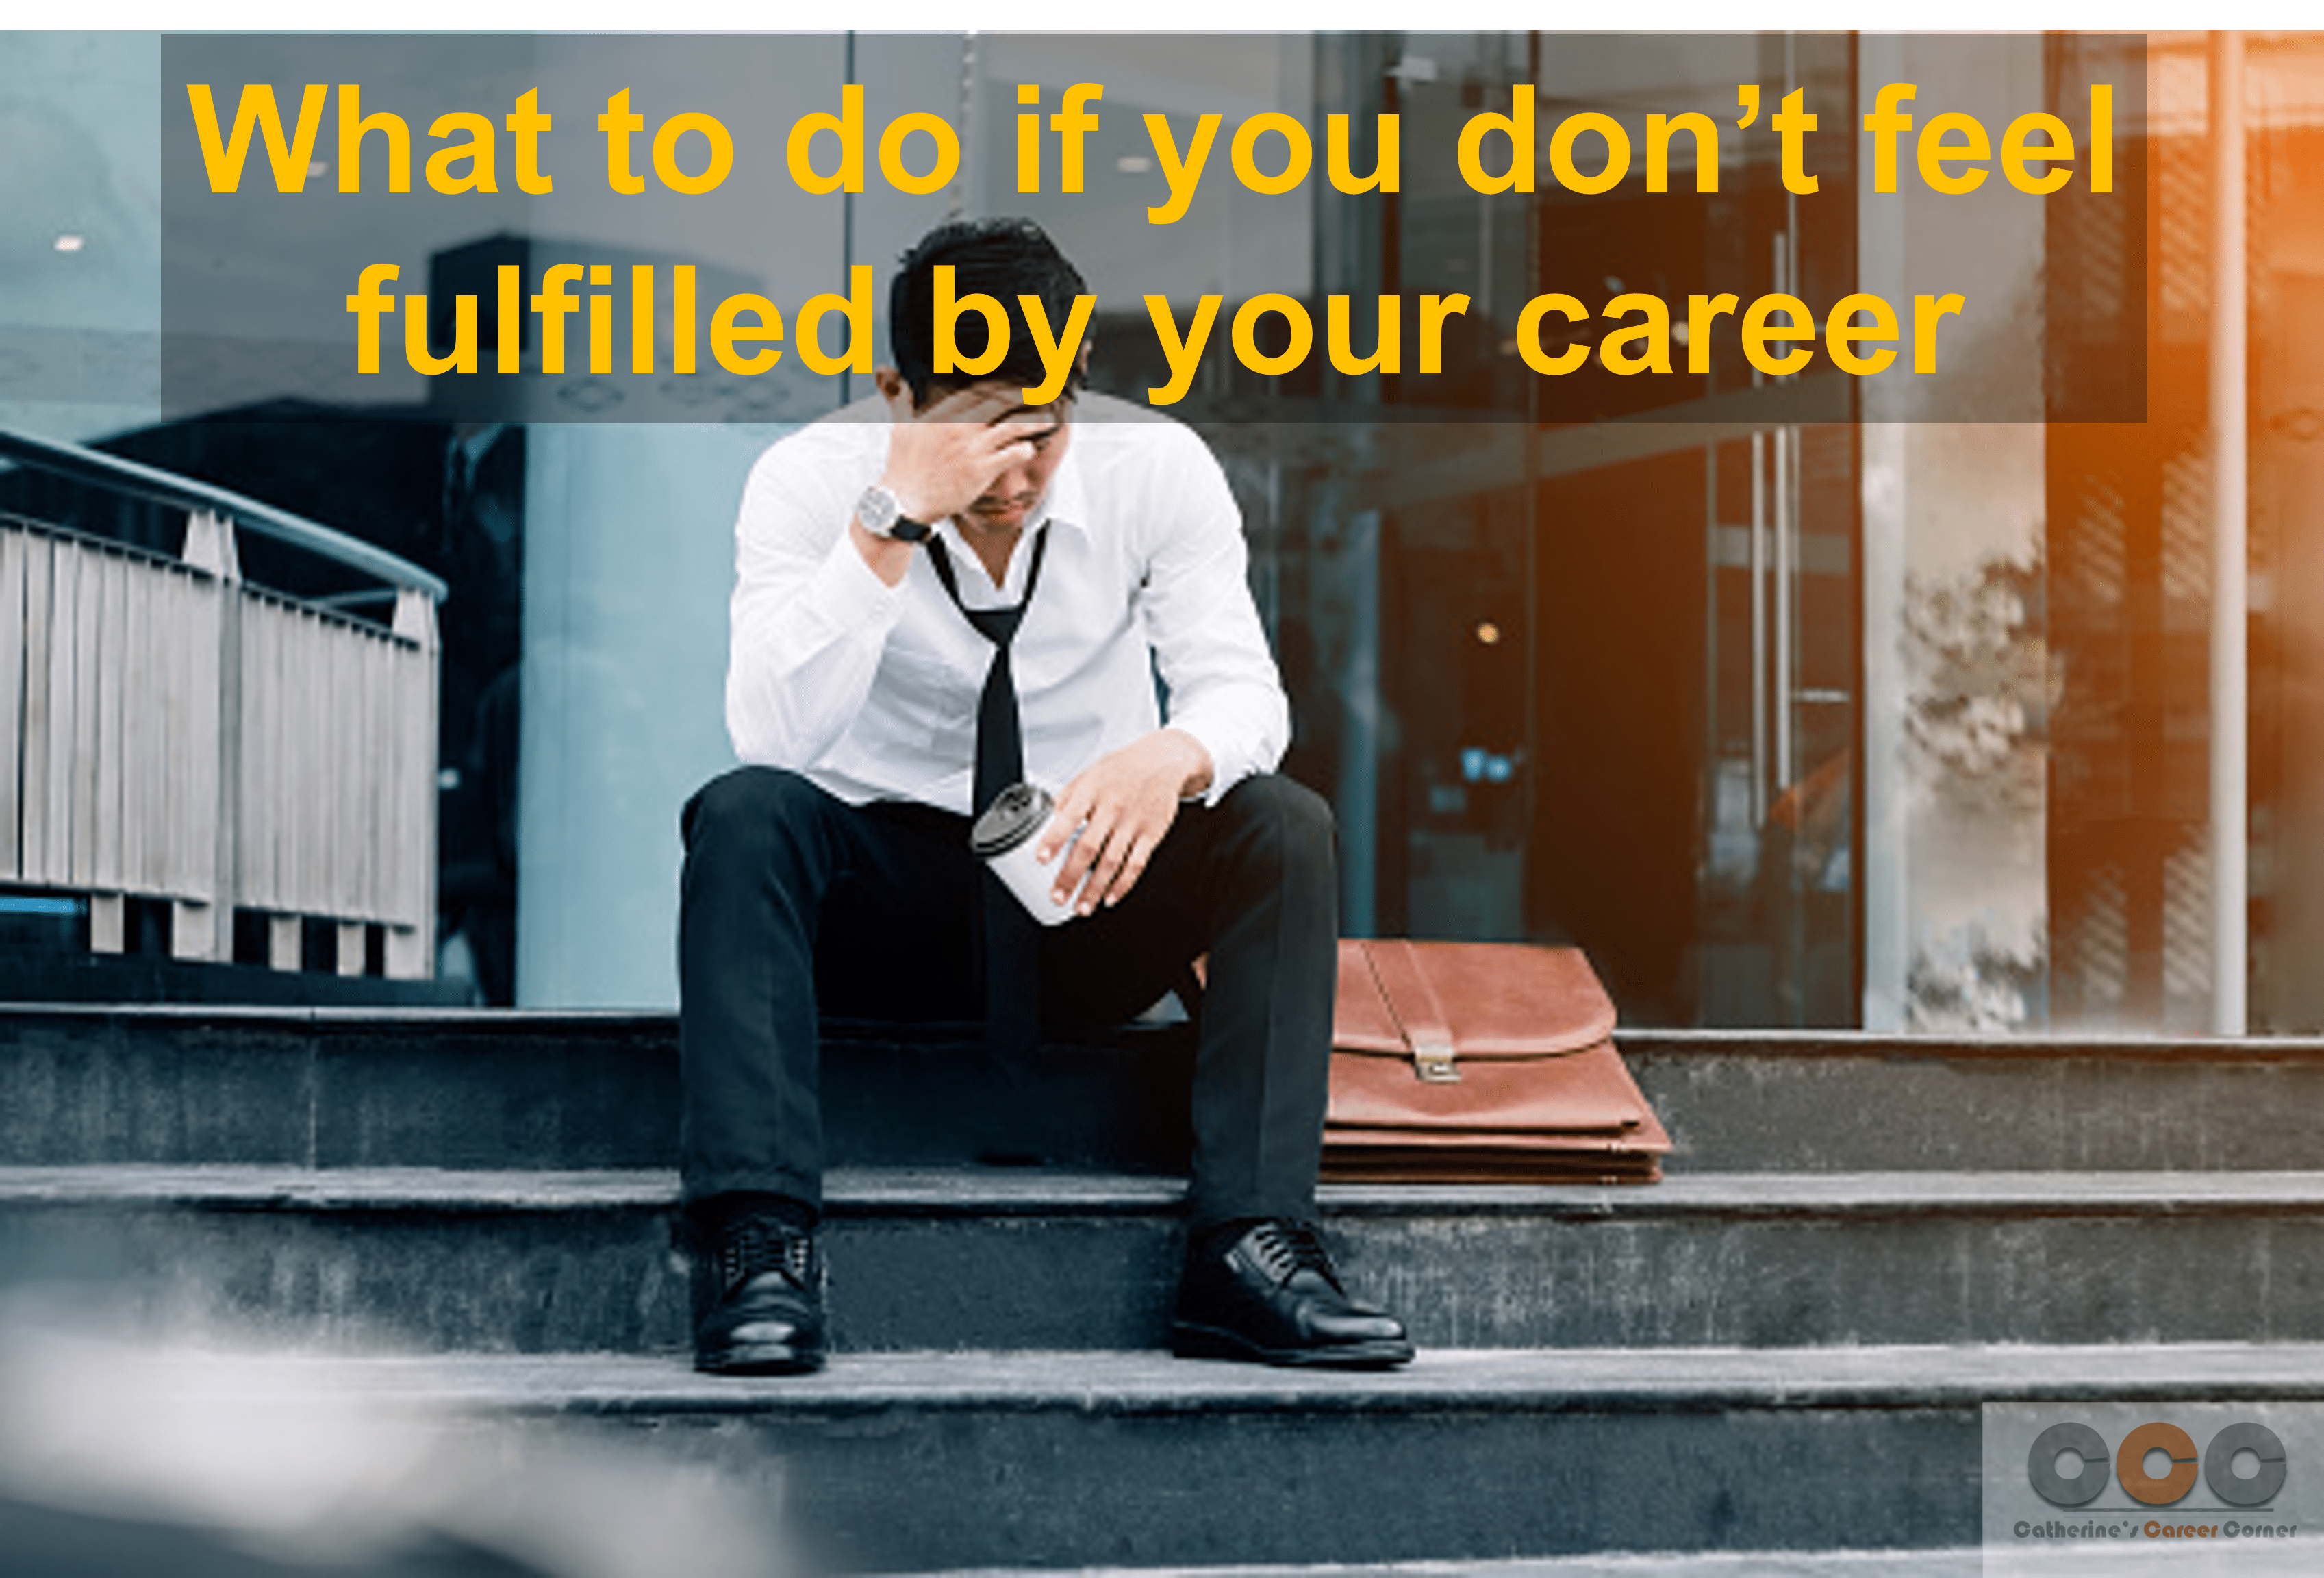 what to do if you don't feel fulfilled by your career